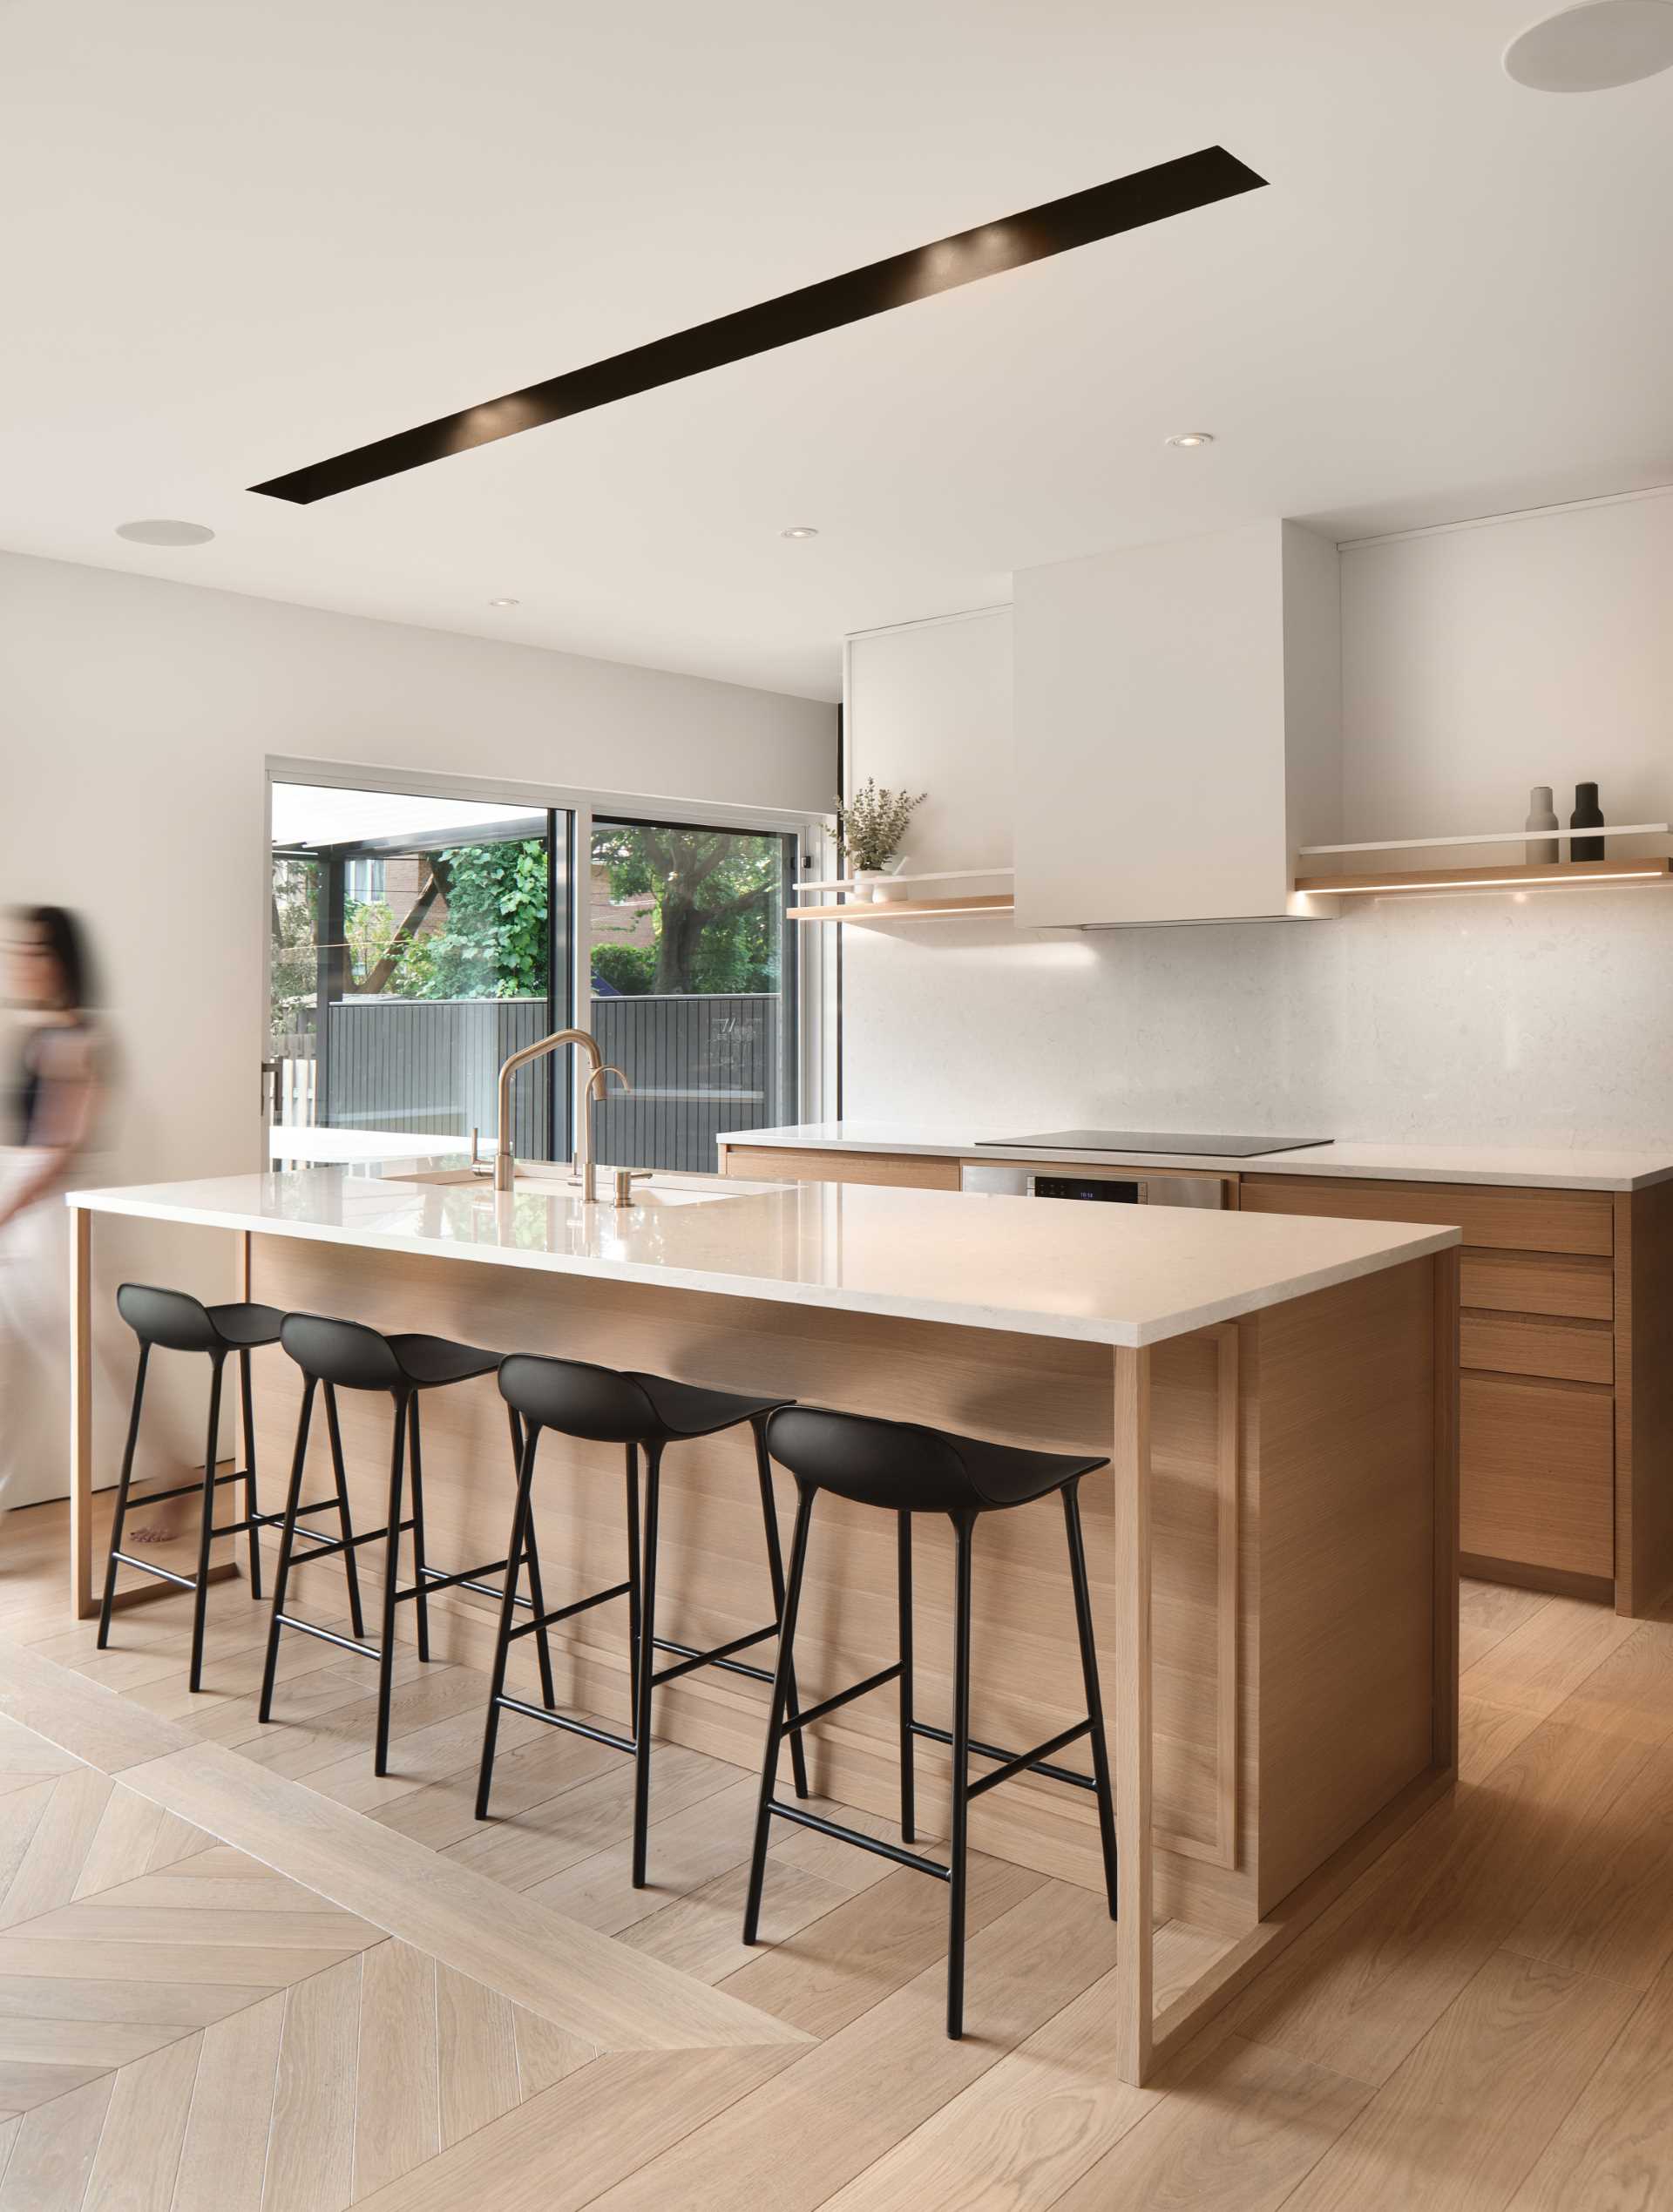 In this modern kitchen, an island creates additional storage and room for seating, while an open shelf built into the wall provides a place to display dinnerware and glassware.